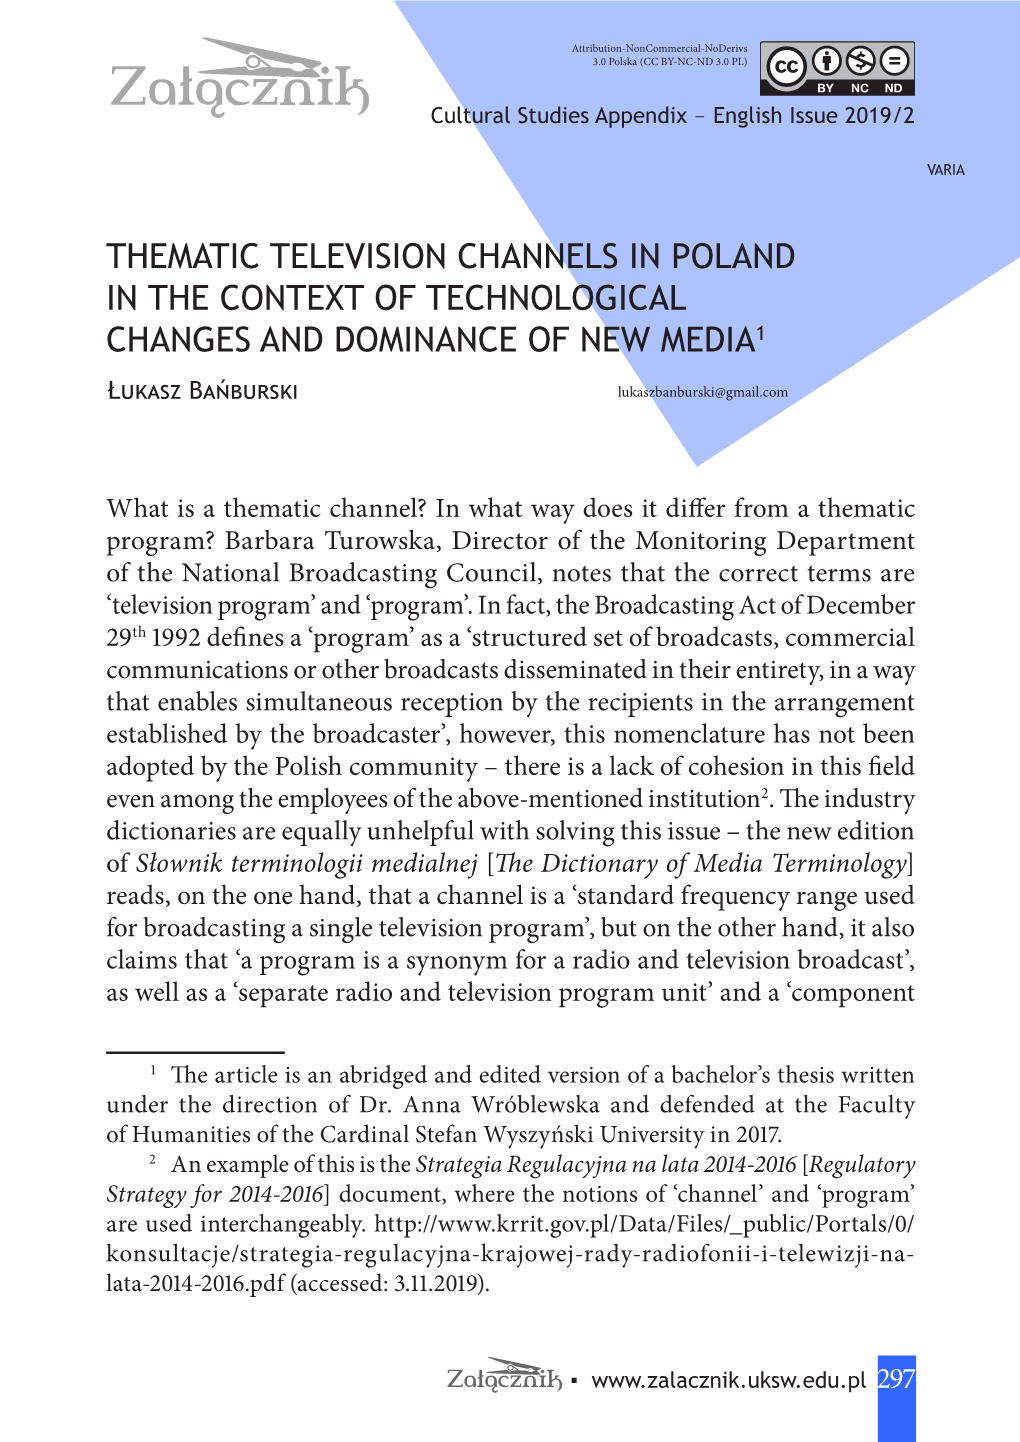 Thematic Television Channels in Poland in the Context of Technological Changes and Dominance of New Media1